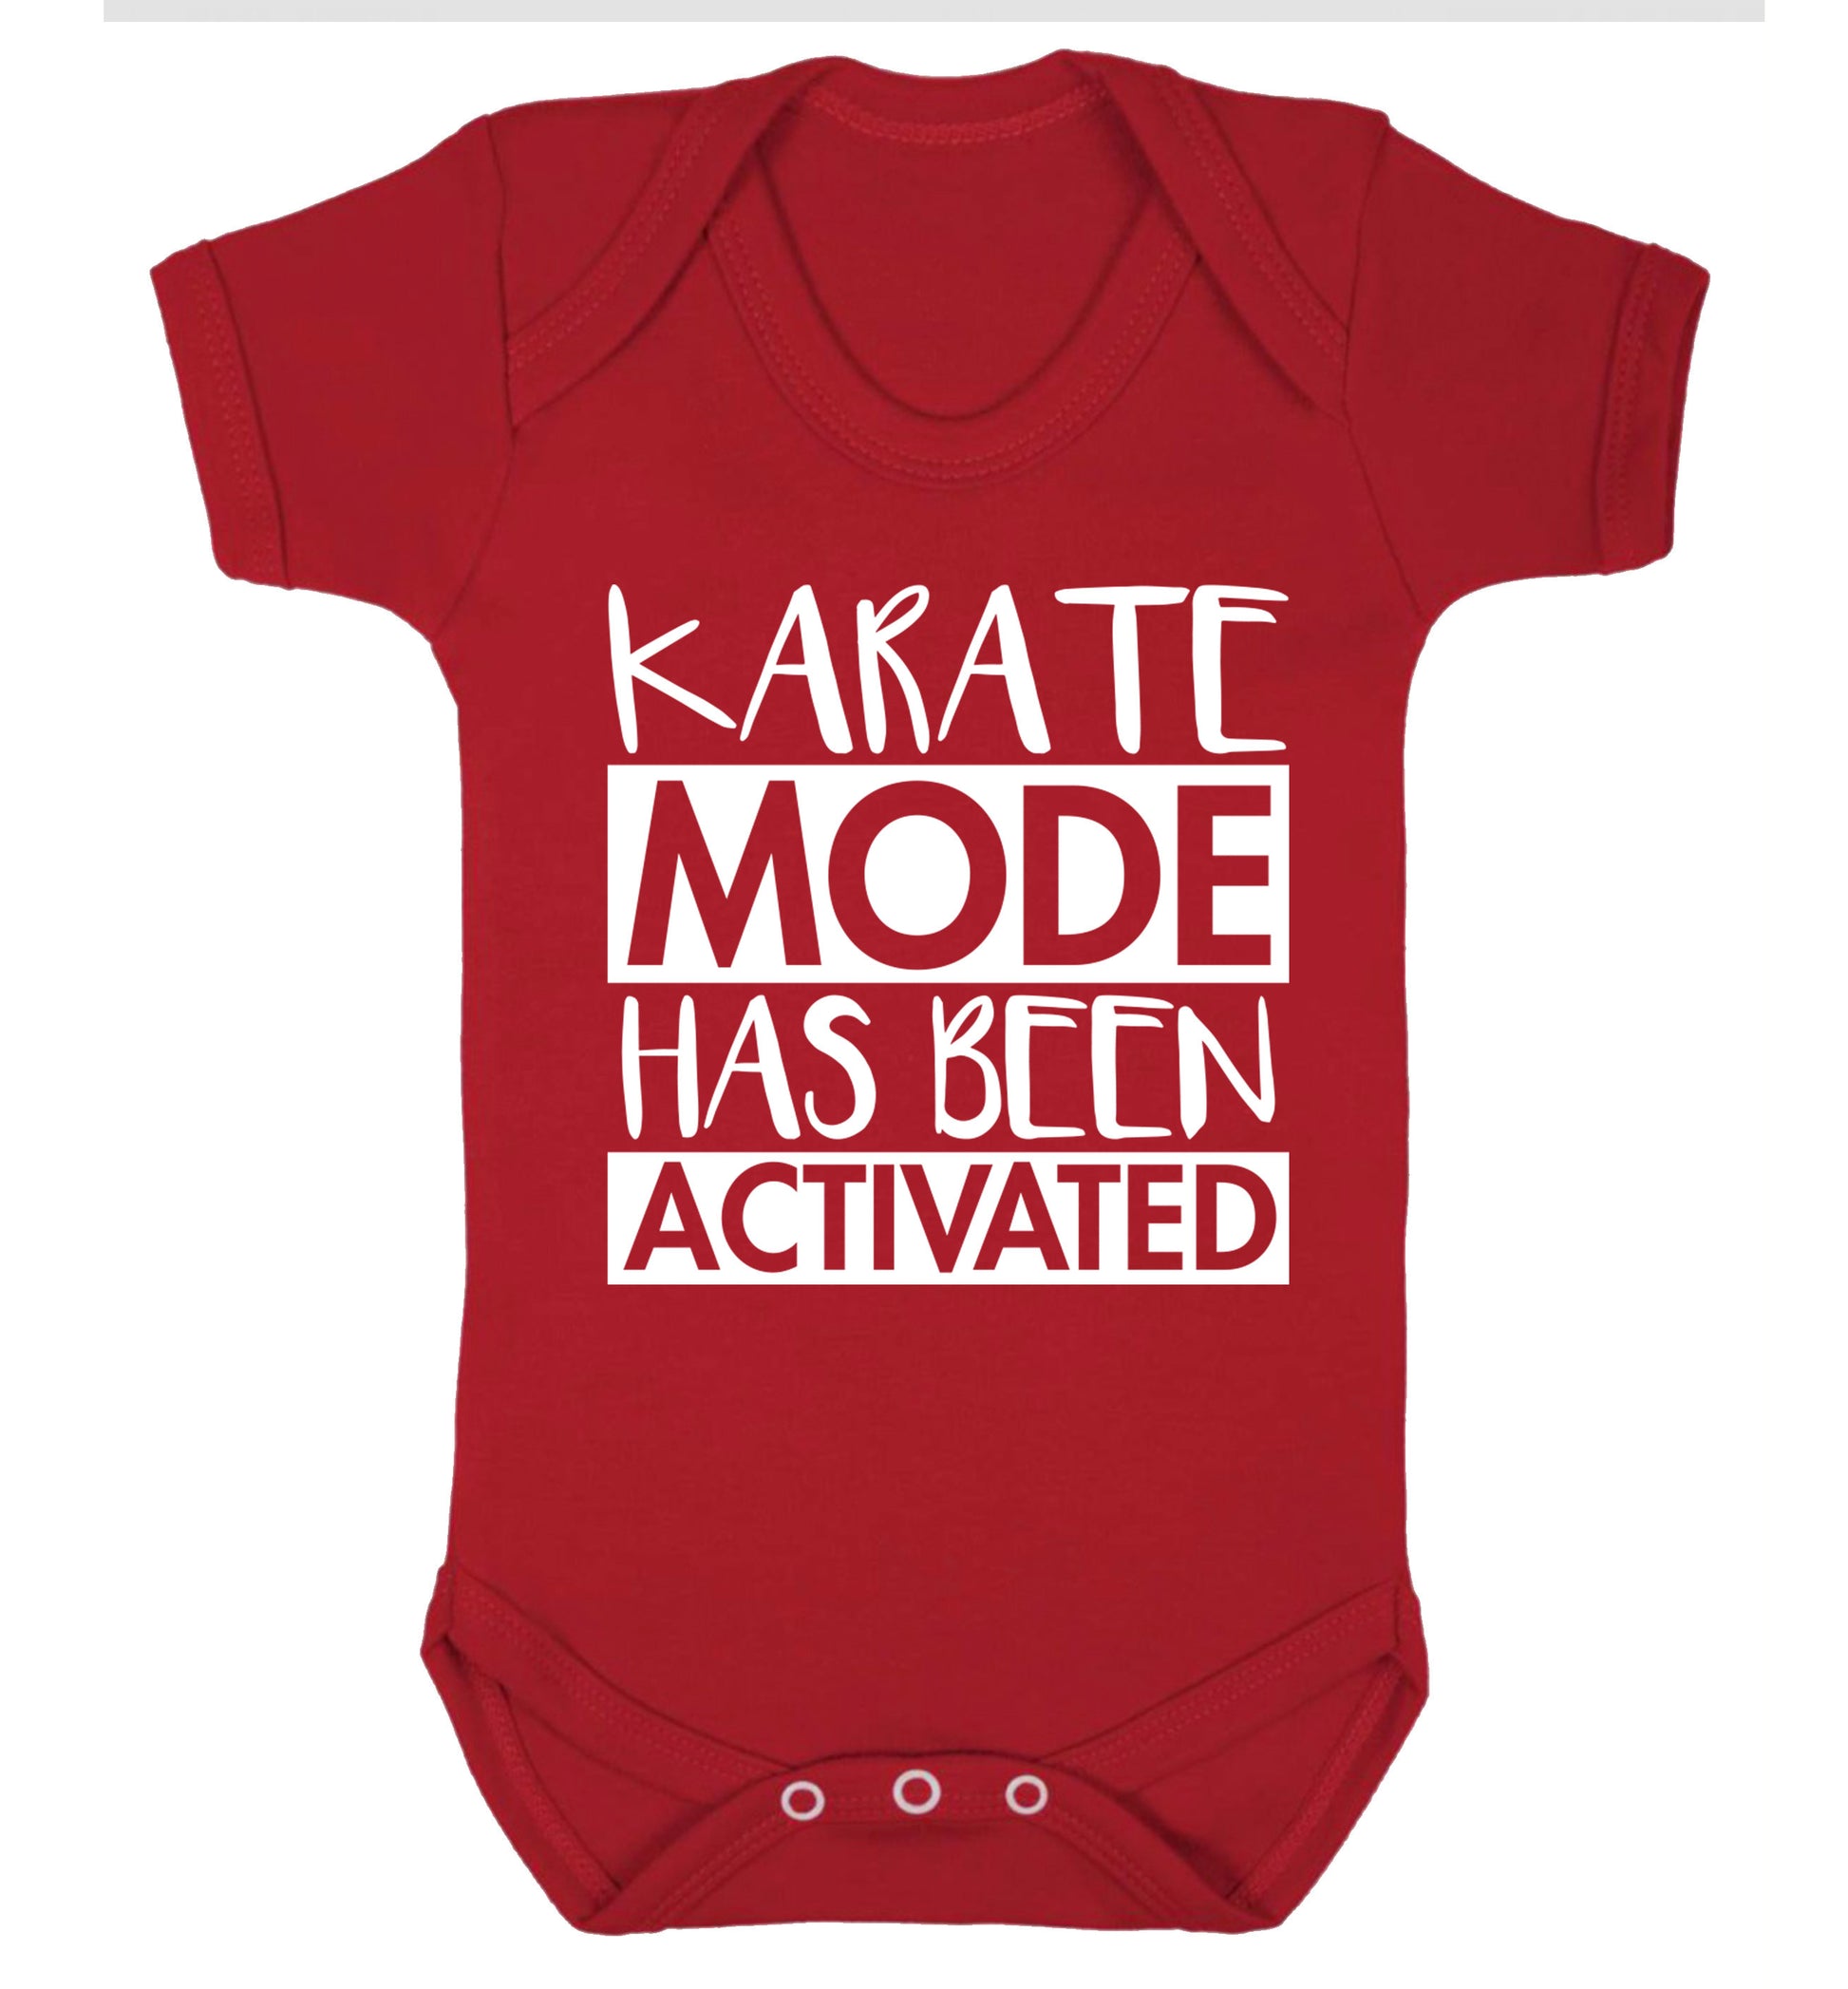 Karate mode activated Baby Vest red 18-24 months